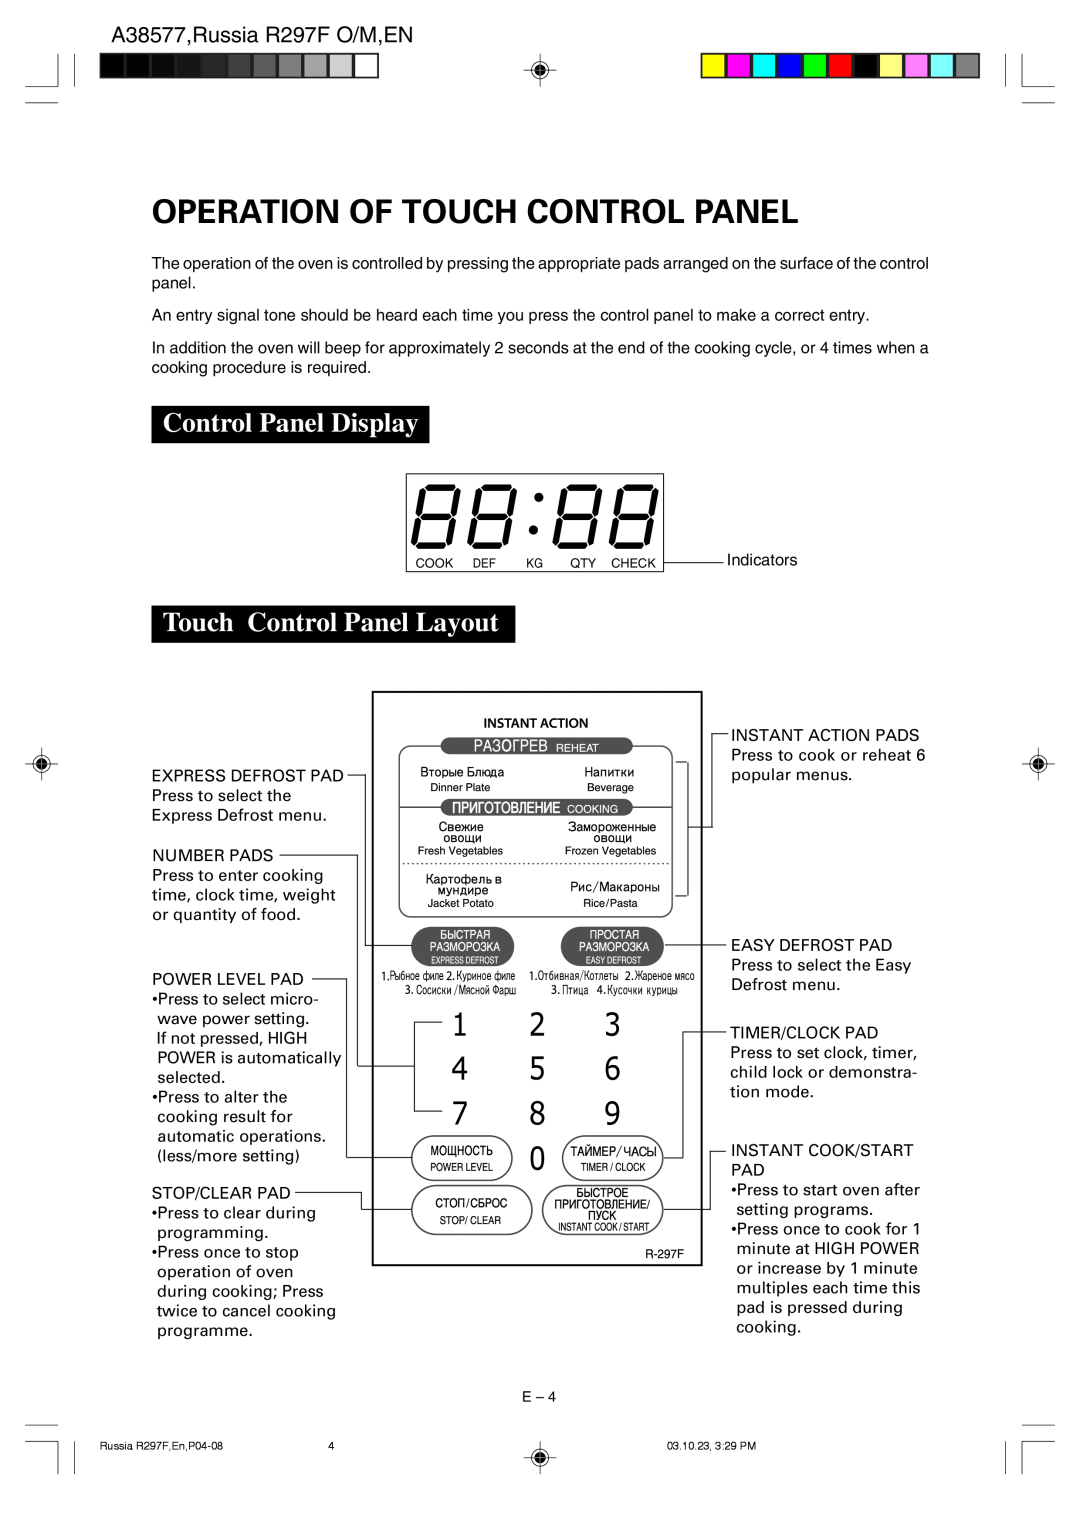 Sharp R-297F operation manual Operation Of Touch Control Panel, Control Panel Display, Touch Control Panel Layout 